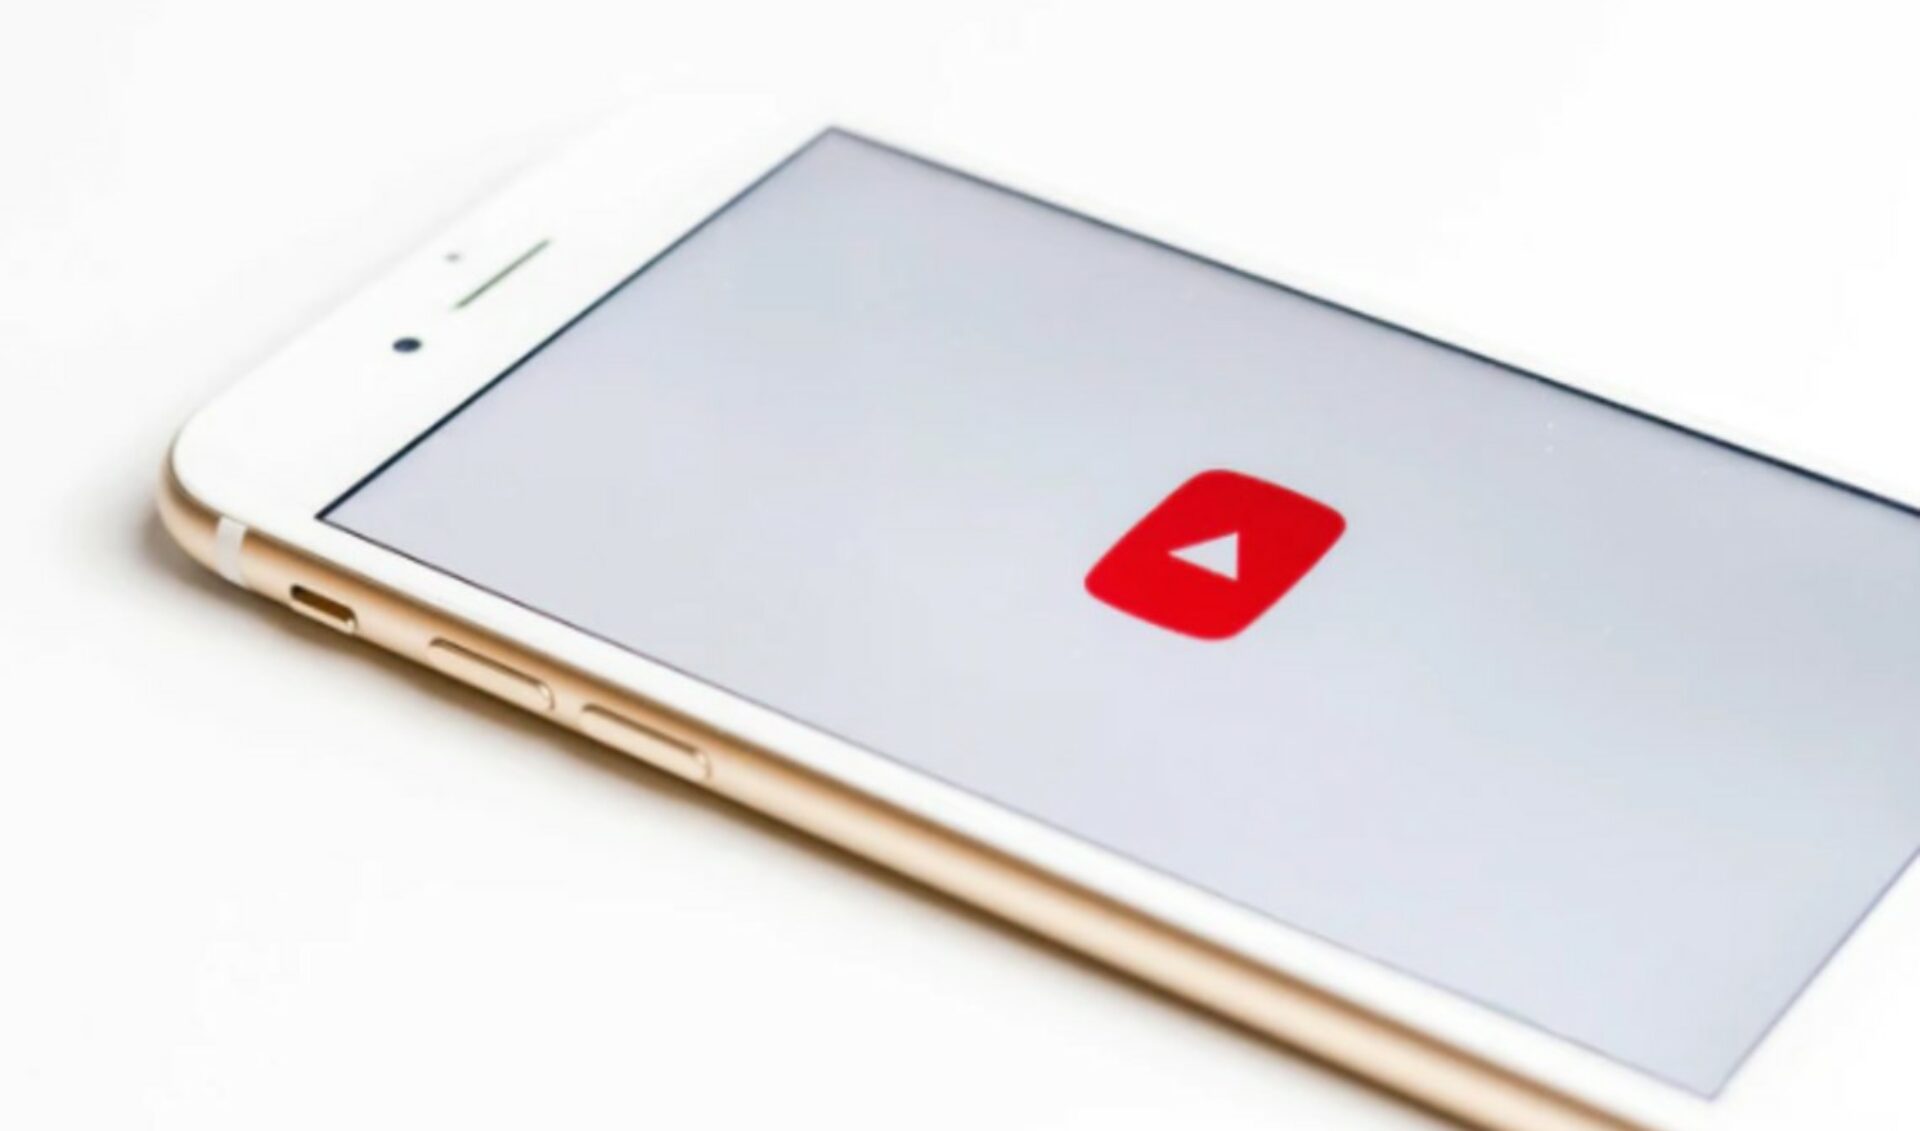 YouTube Took Down Most Videos Ever In A Single Quarter After COVID Altered Its Moderation Approach